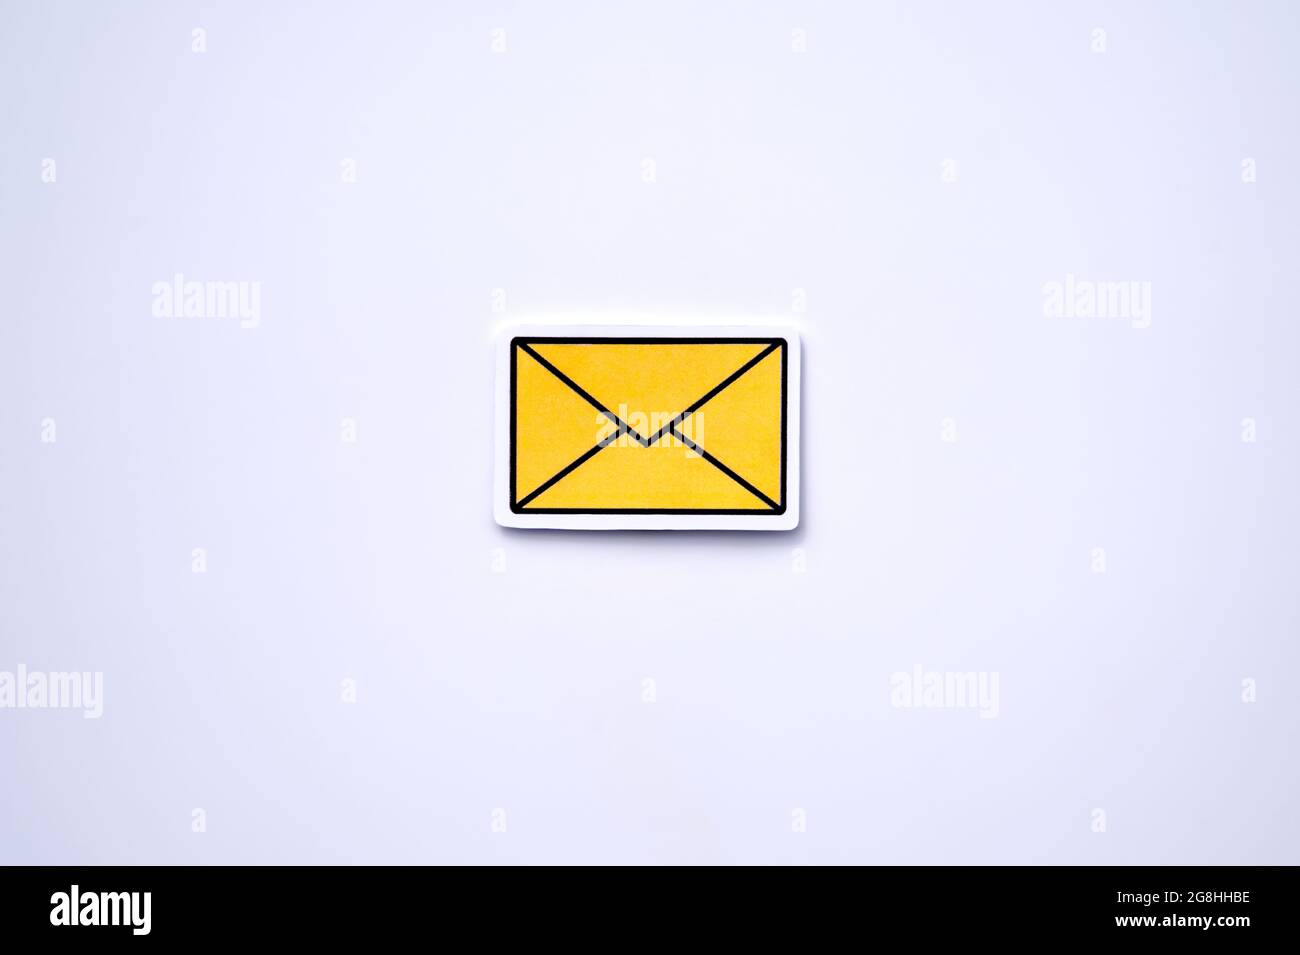 Yellow message sign or envelope icon against a white background Stock Photo